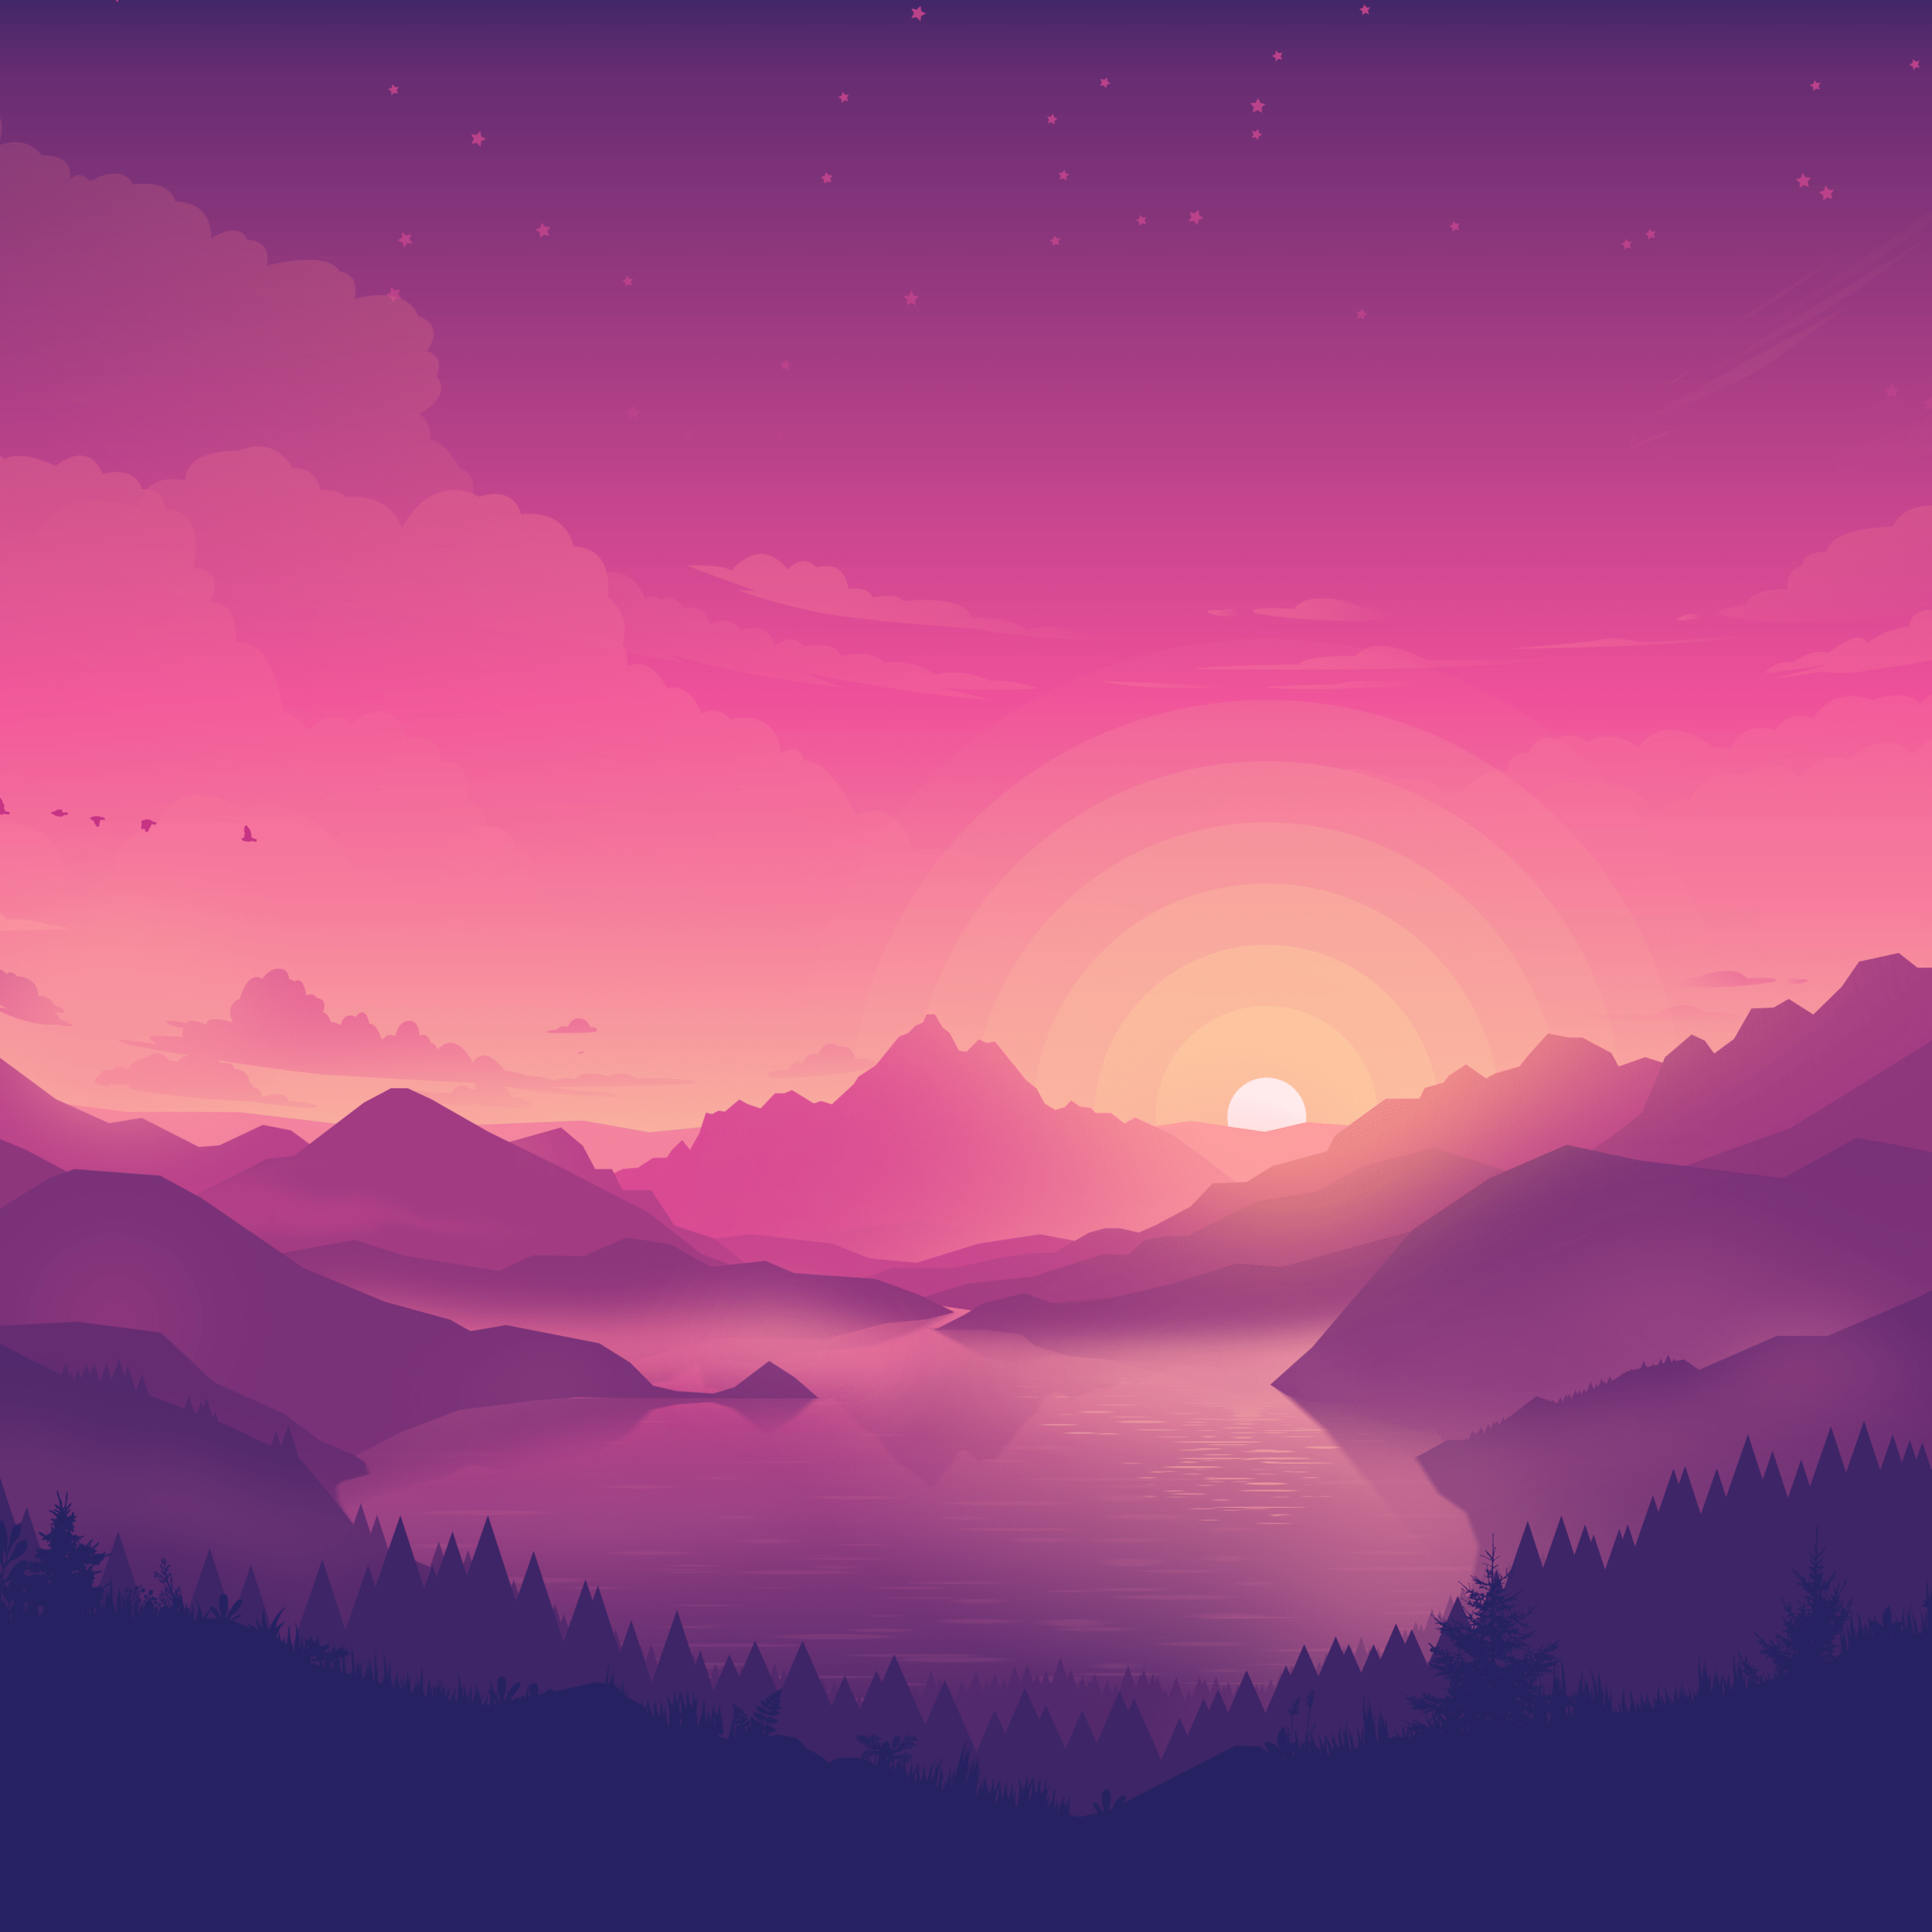 A pink and purple sunset over a lake surrounded by mountains - Landscape